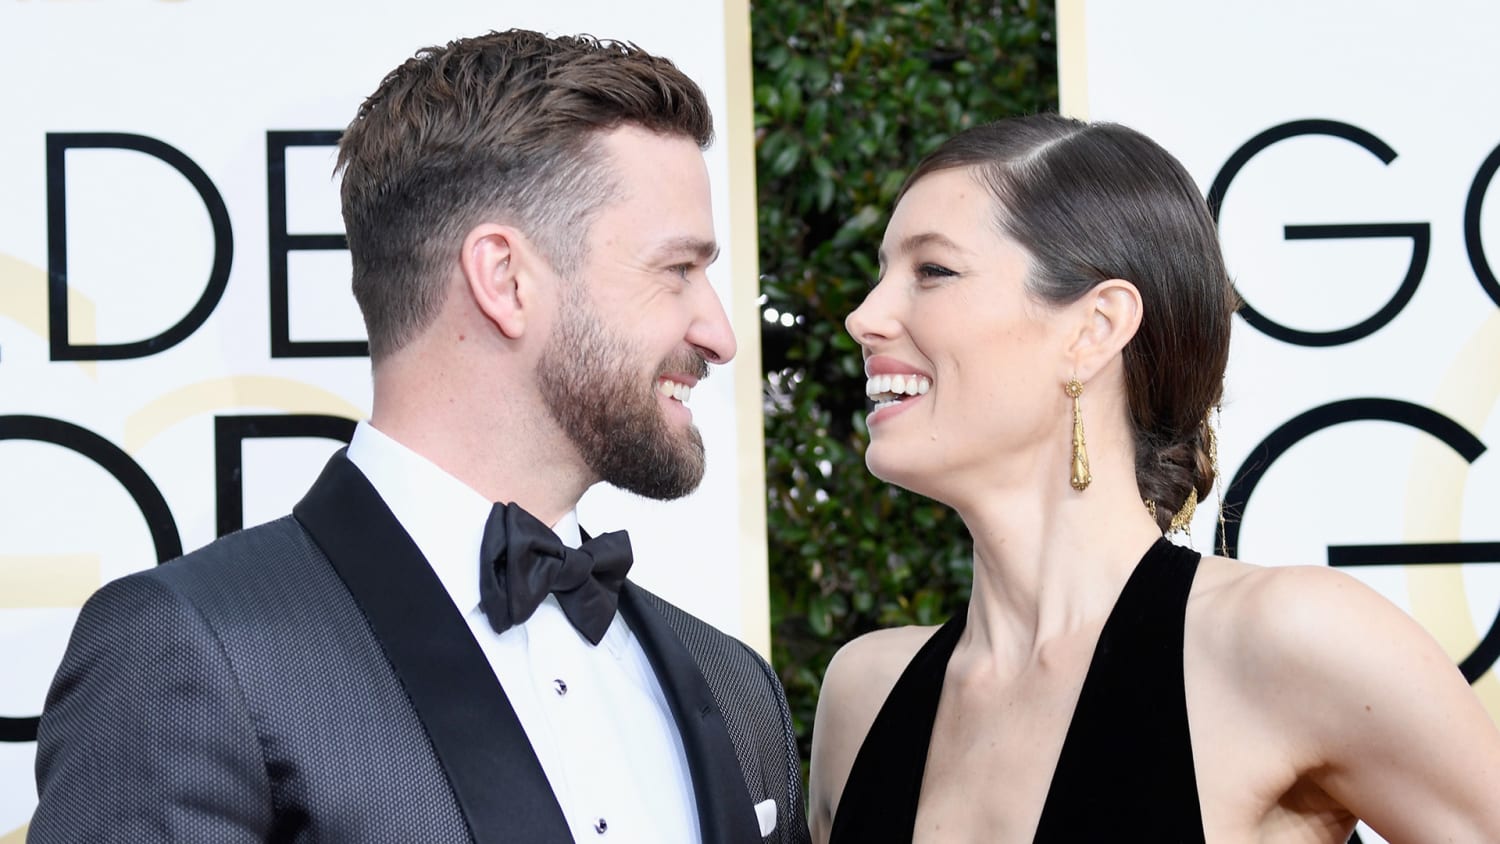 Jessica Biel and son Silas watch Justin Timberlake compete at the